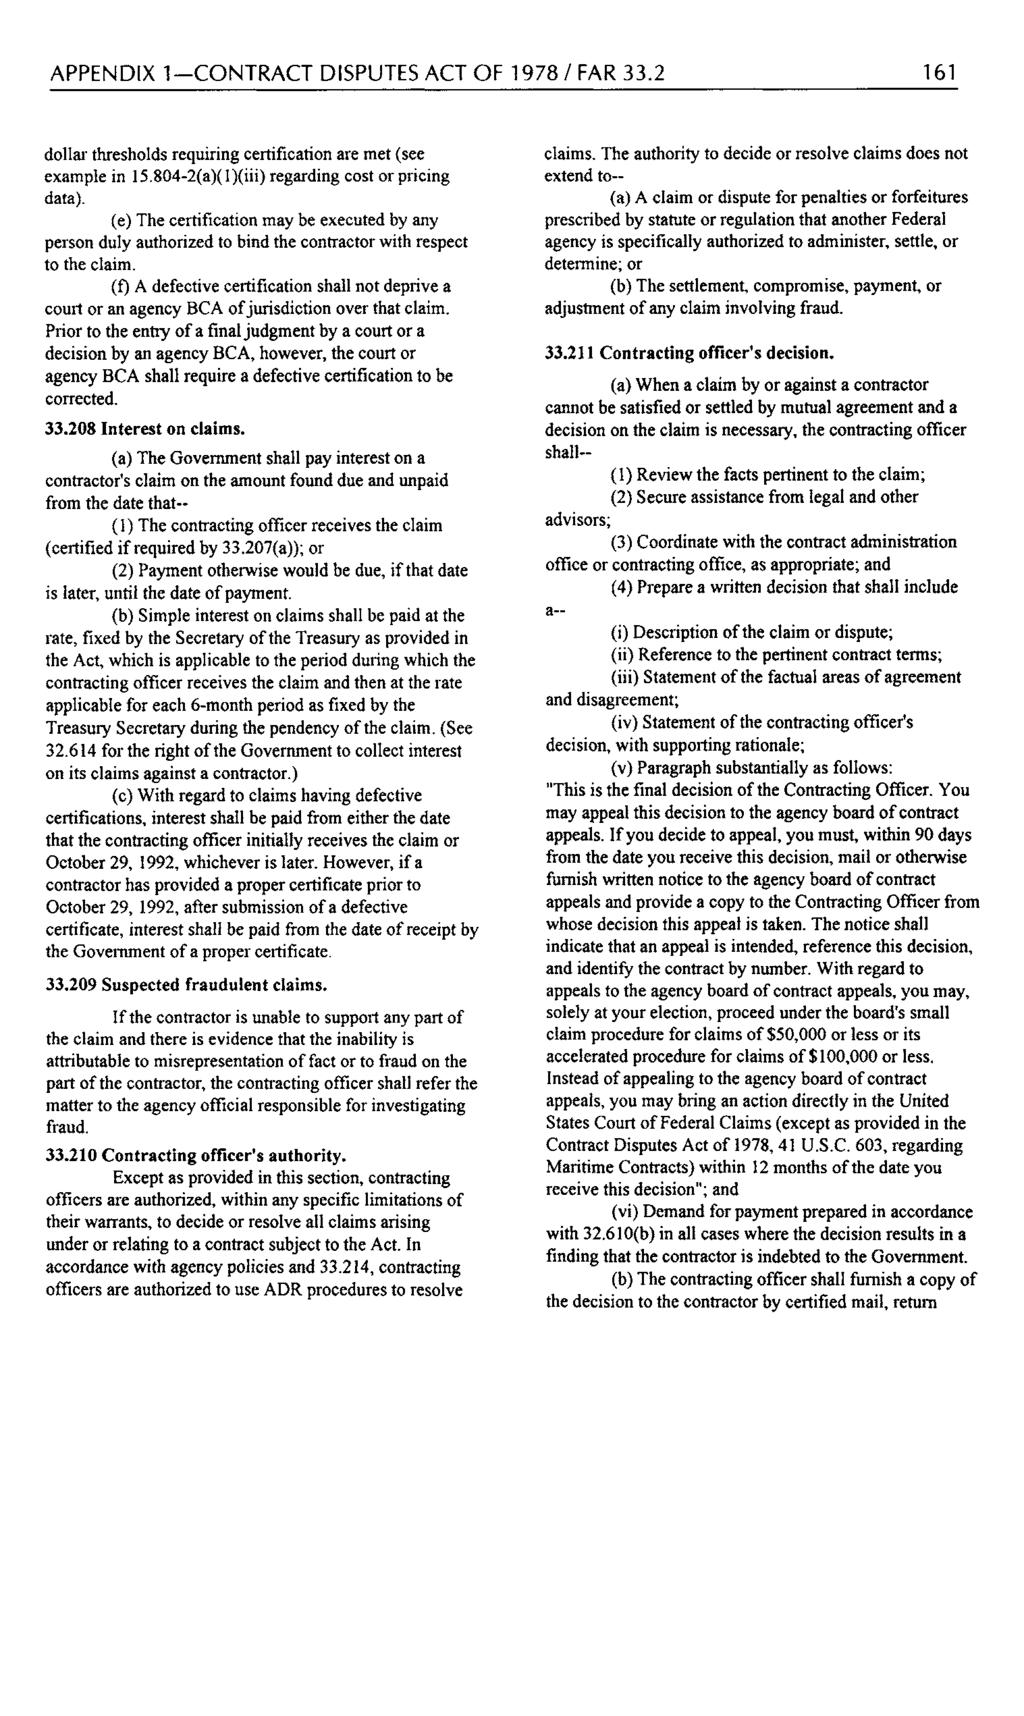 APPENDIX 1 CONTRACT DISPUTES ACT OF 1978 / FAR 33.2 161 dollar thresholds requiring certification are met (see example in 15.804-2(a)(l)(iii) regarding cost or pricing data).